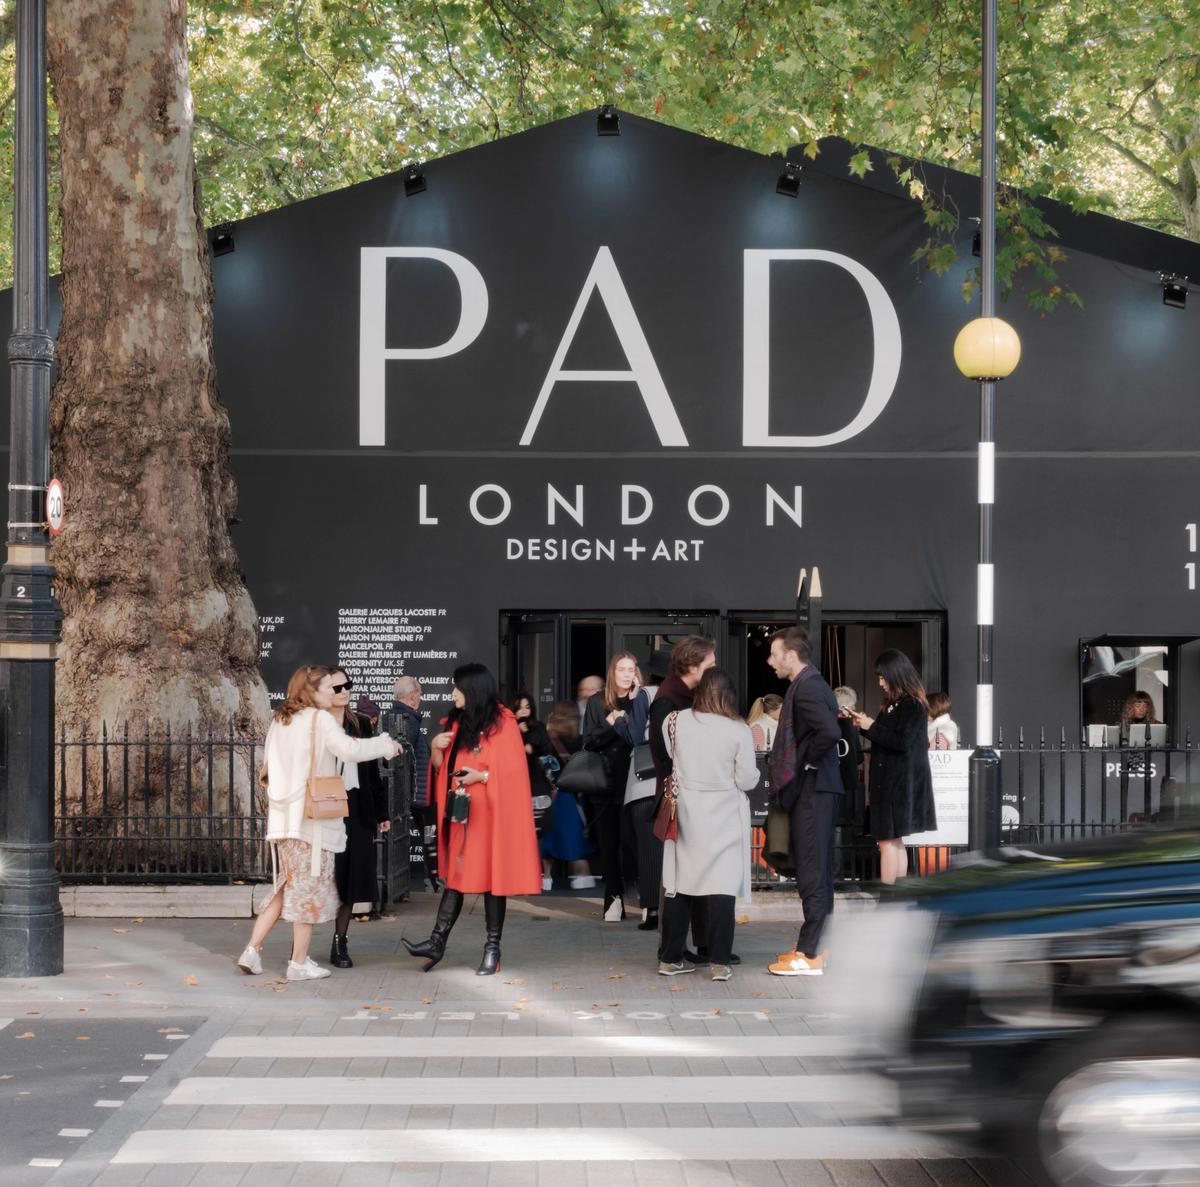 PAD London takes place every October in a temporary tent in London's Berkeley Square